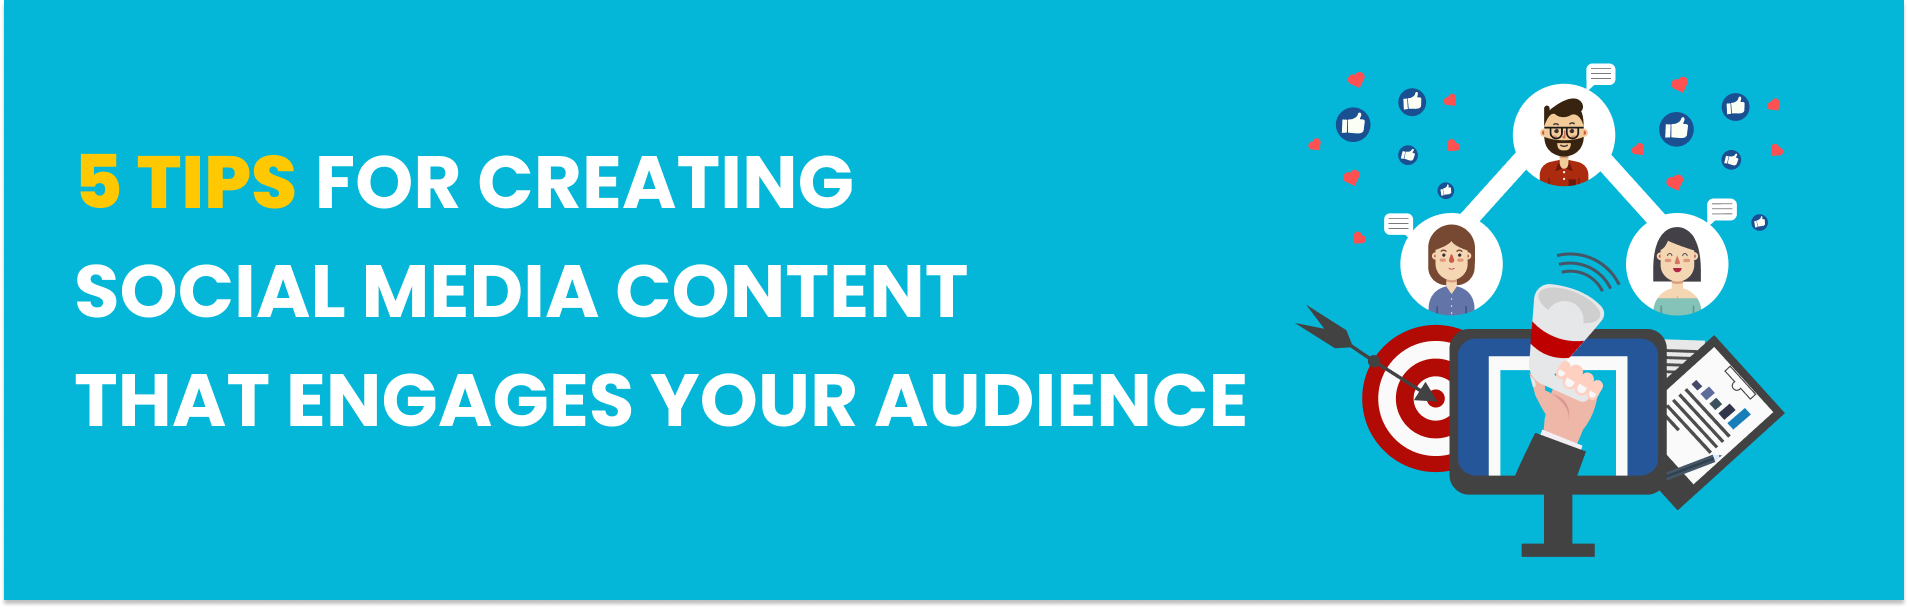 5 Tips For Creating Social Media Content That Engages Your Audience